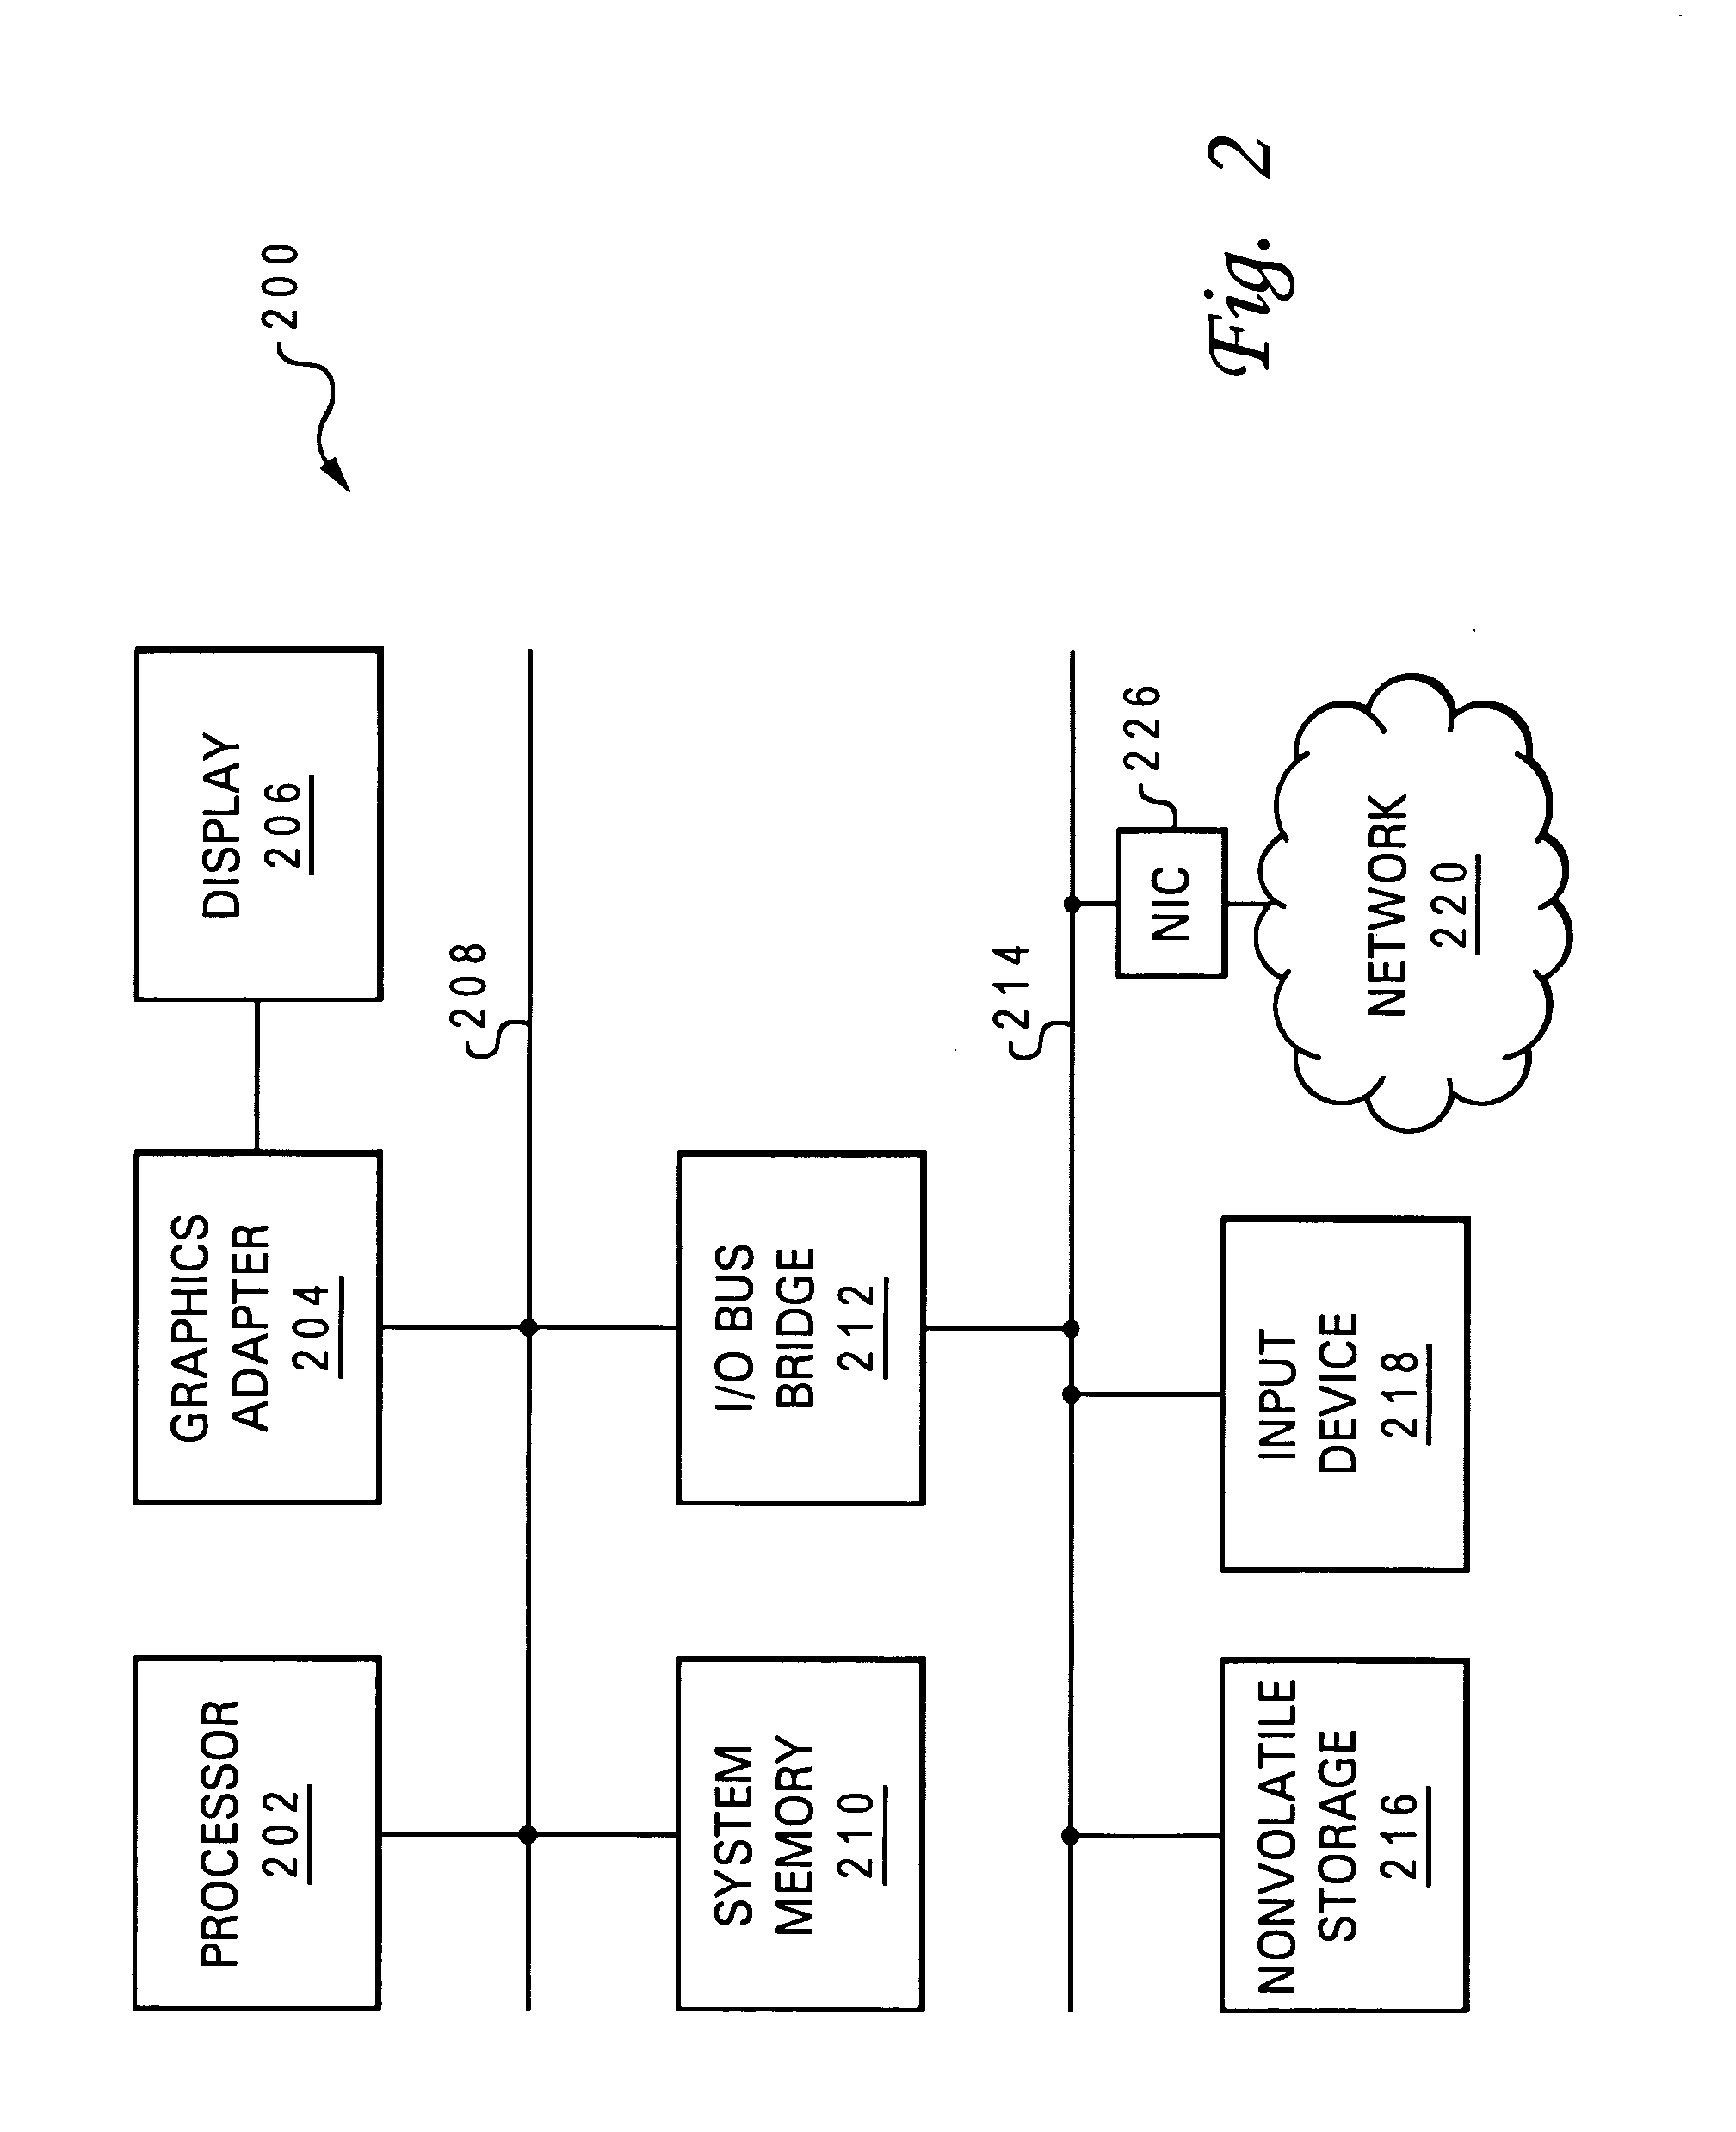 Method for speculative streaming data from a disk drive